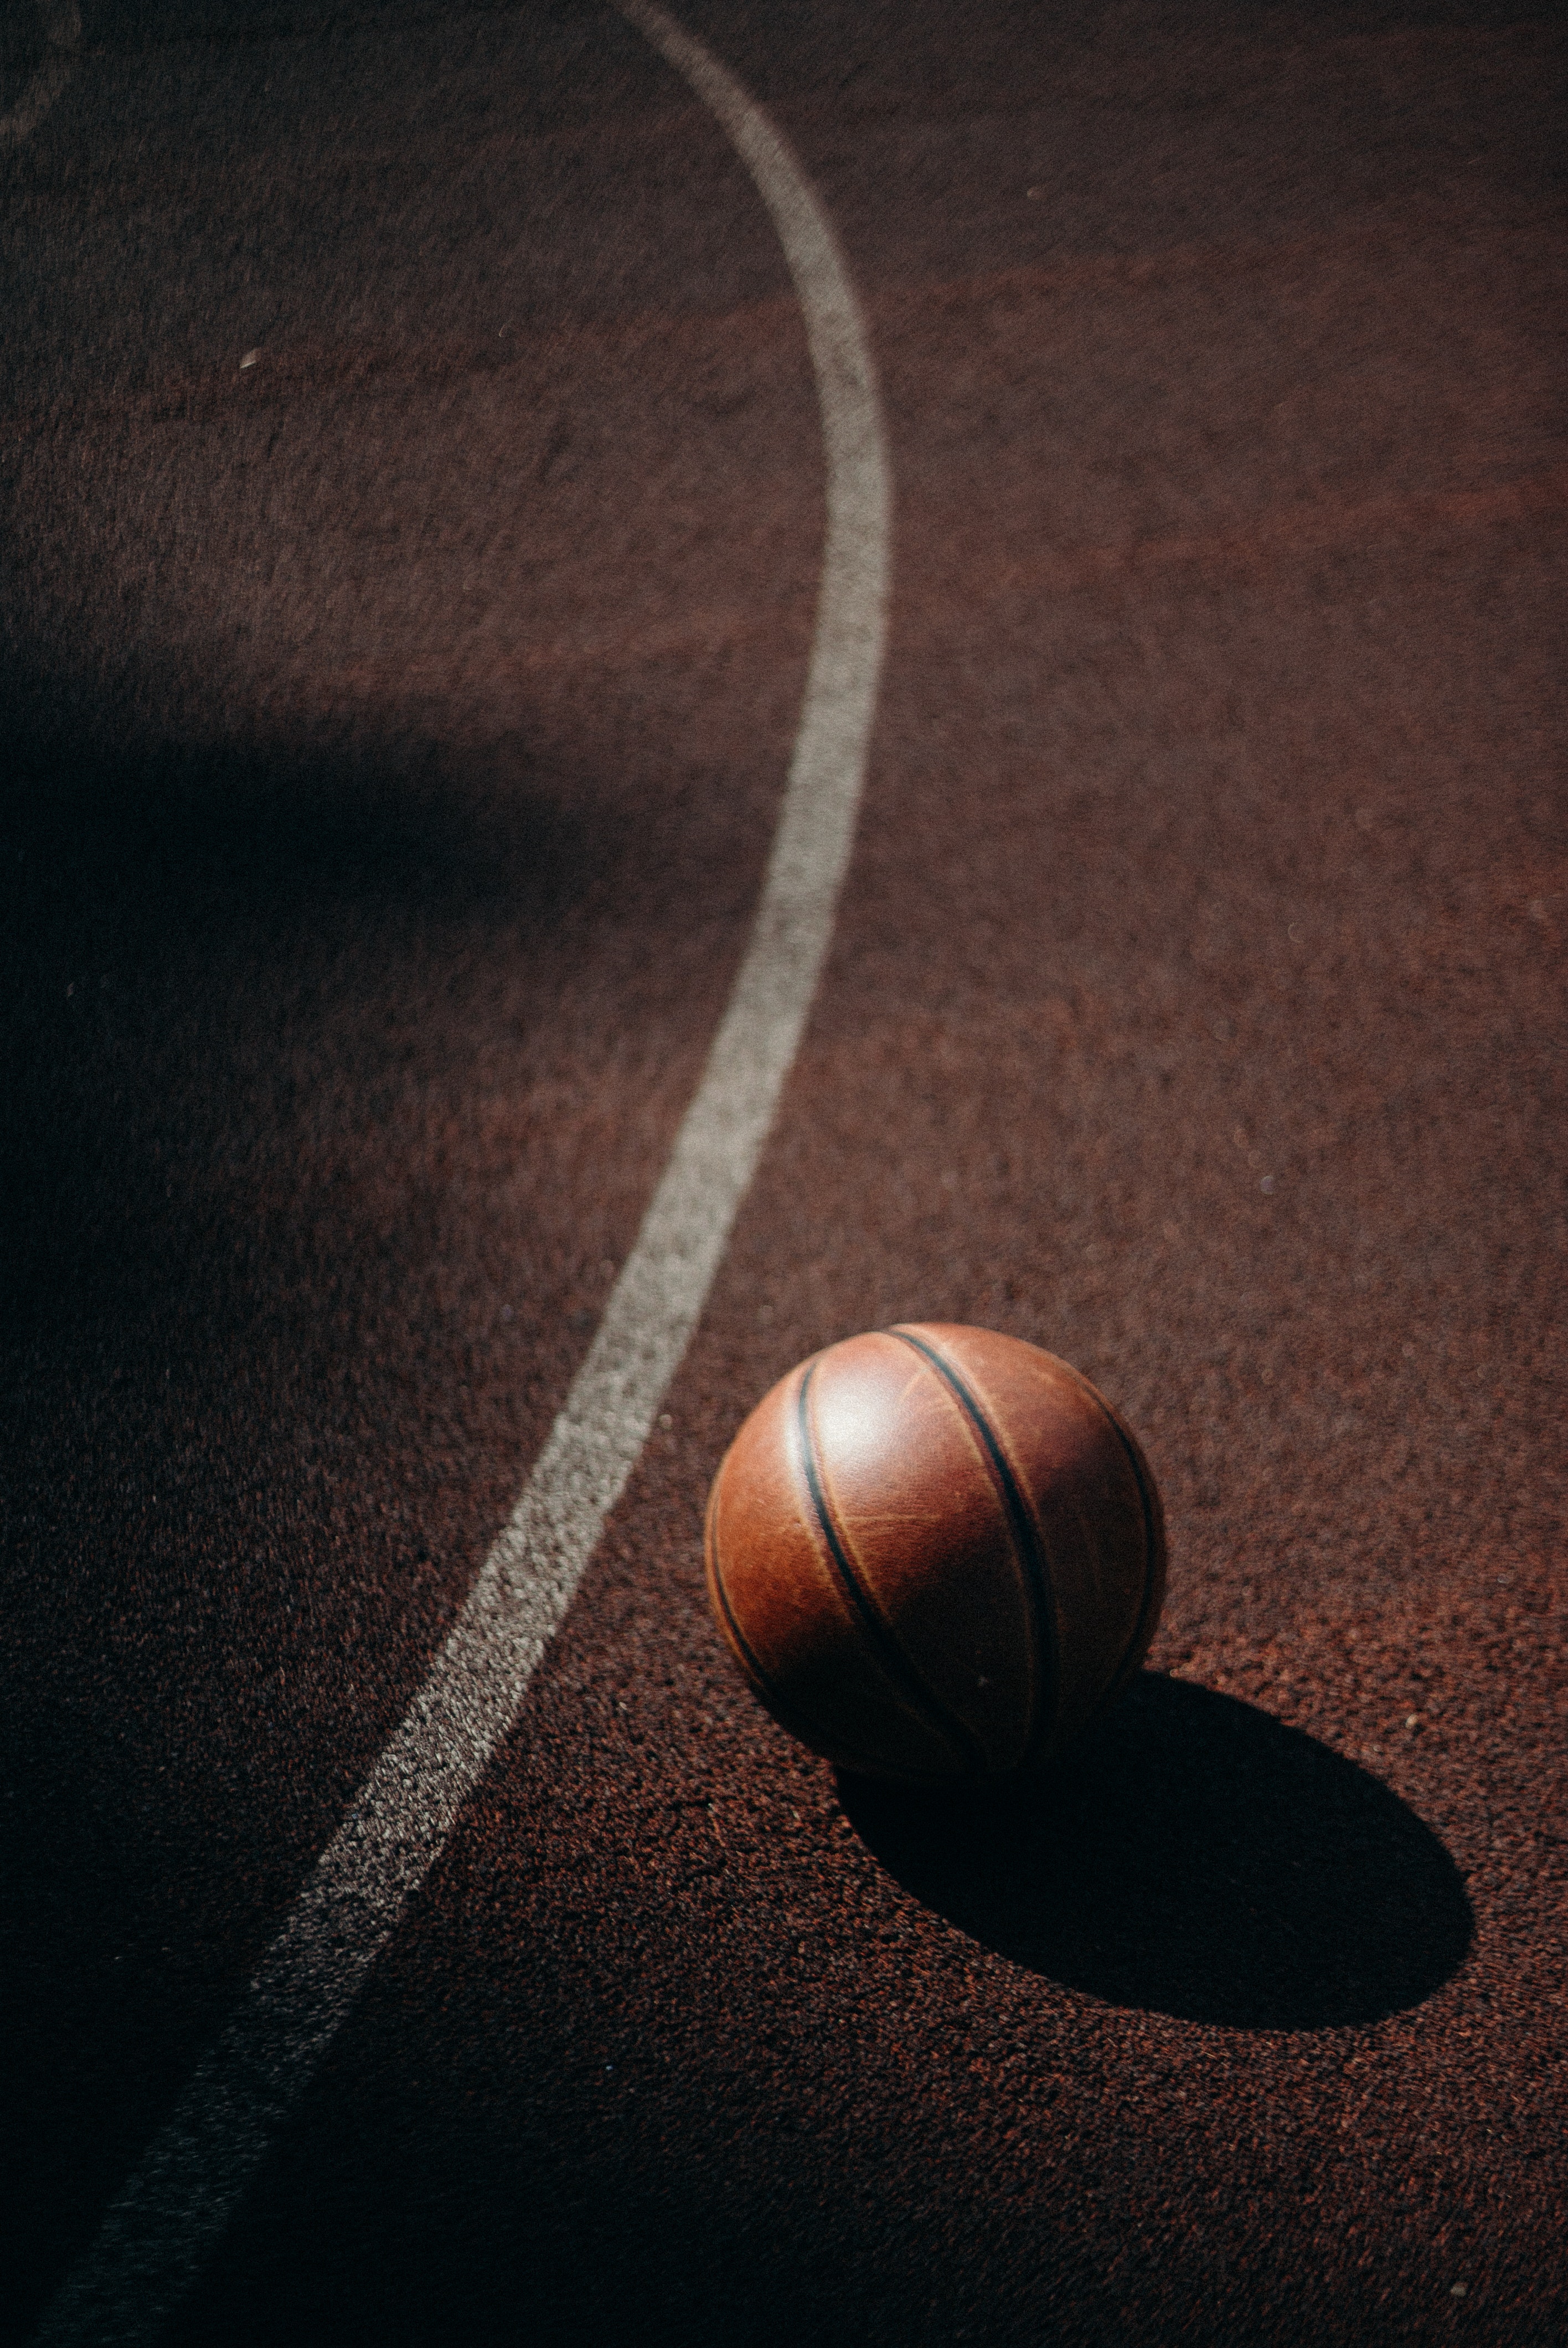 Basketball Wallpapers: Free HD Download [500+ HQ]